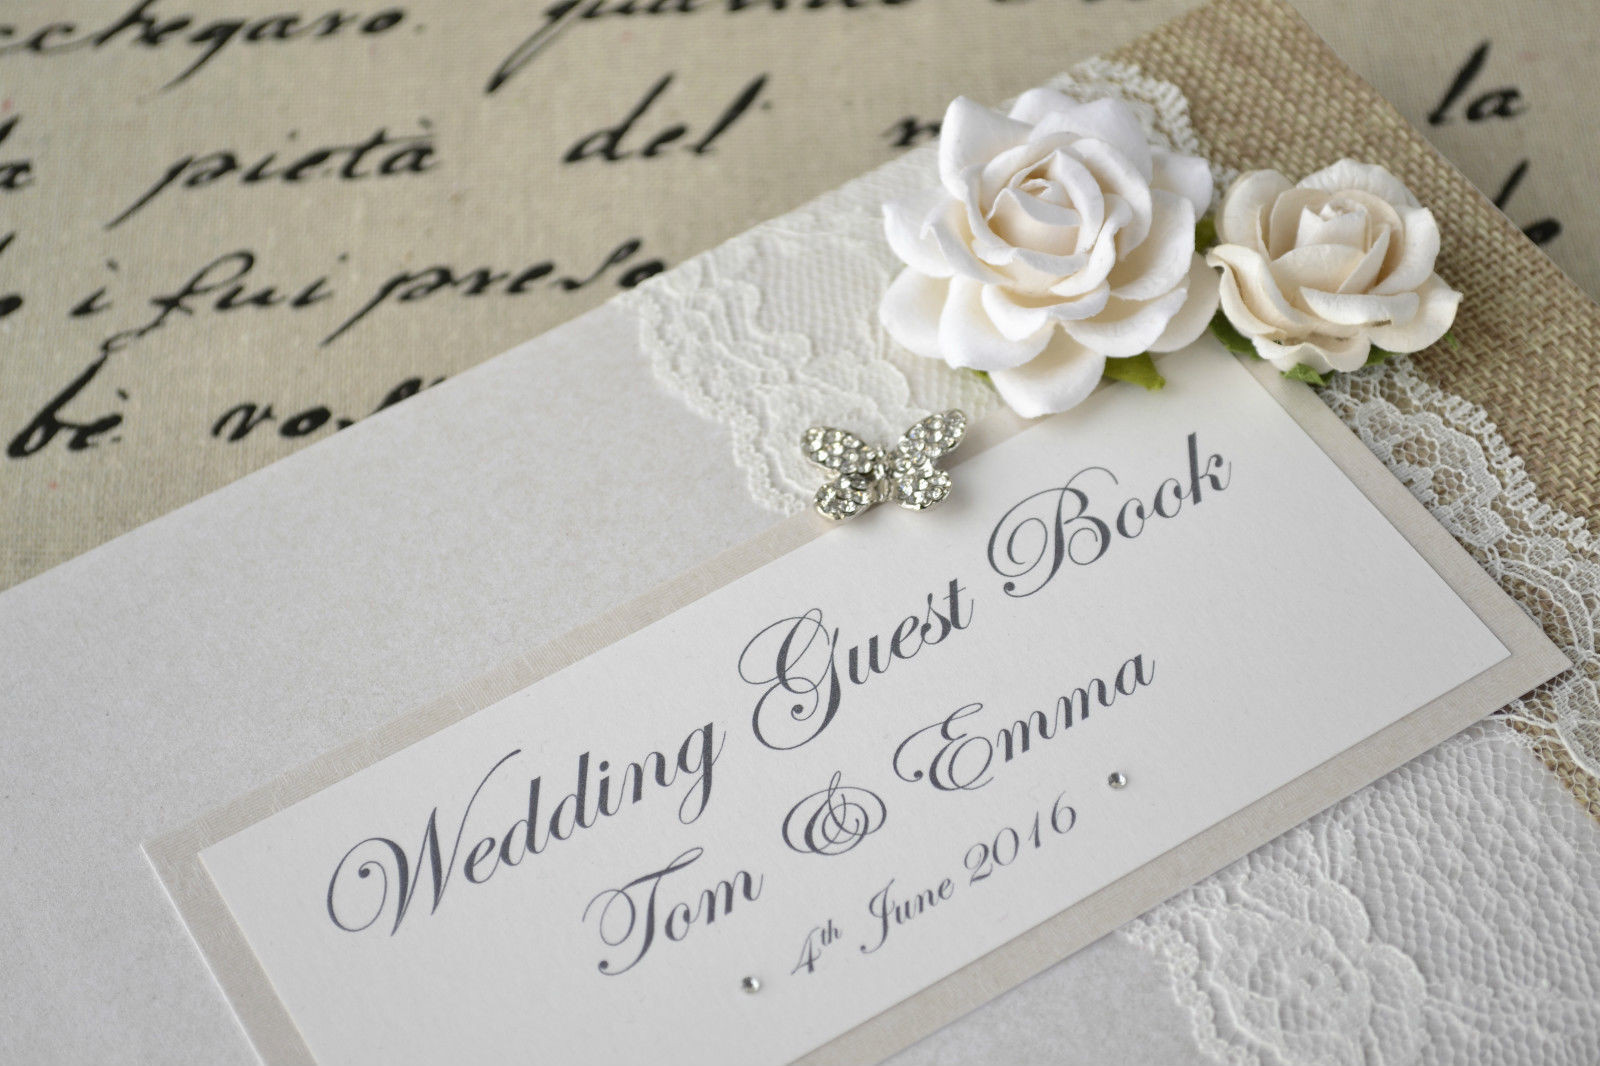 Guest Book Wedding Uk
 Luxury Personalised Wedding Guest Book & Album Set Lace